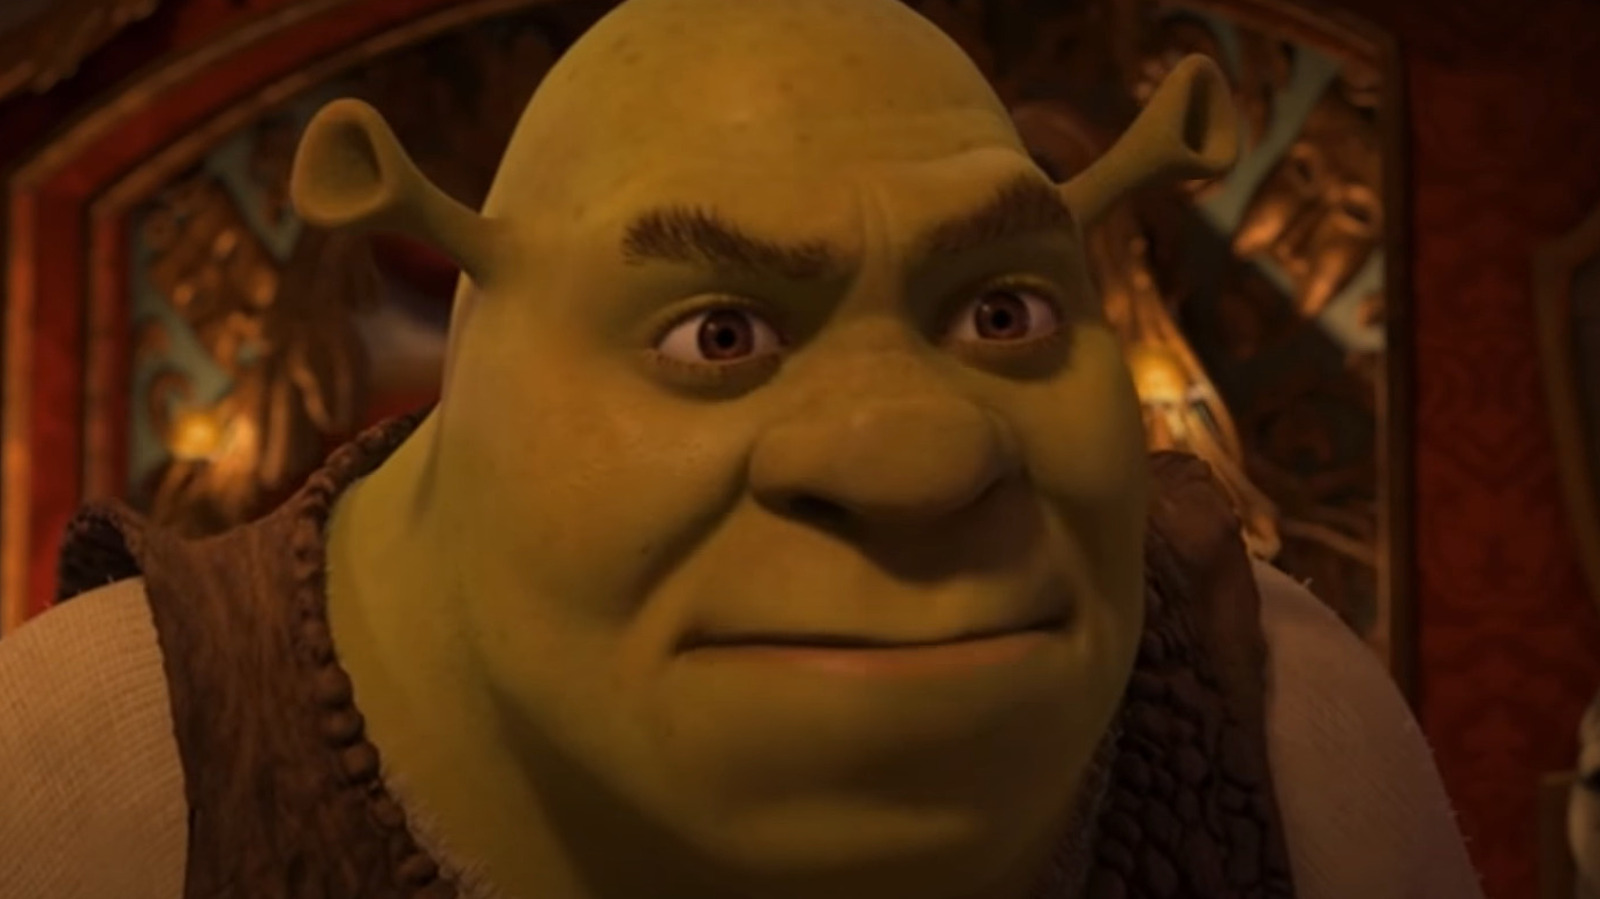 How to Watch the Shrek Movies in Chronological Order